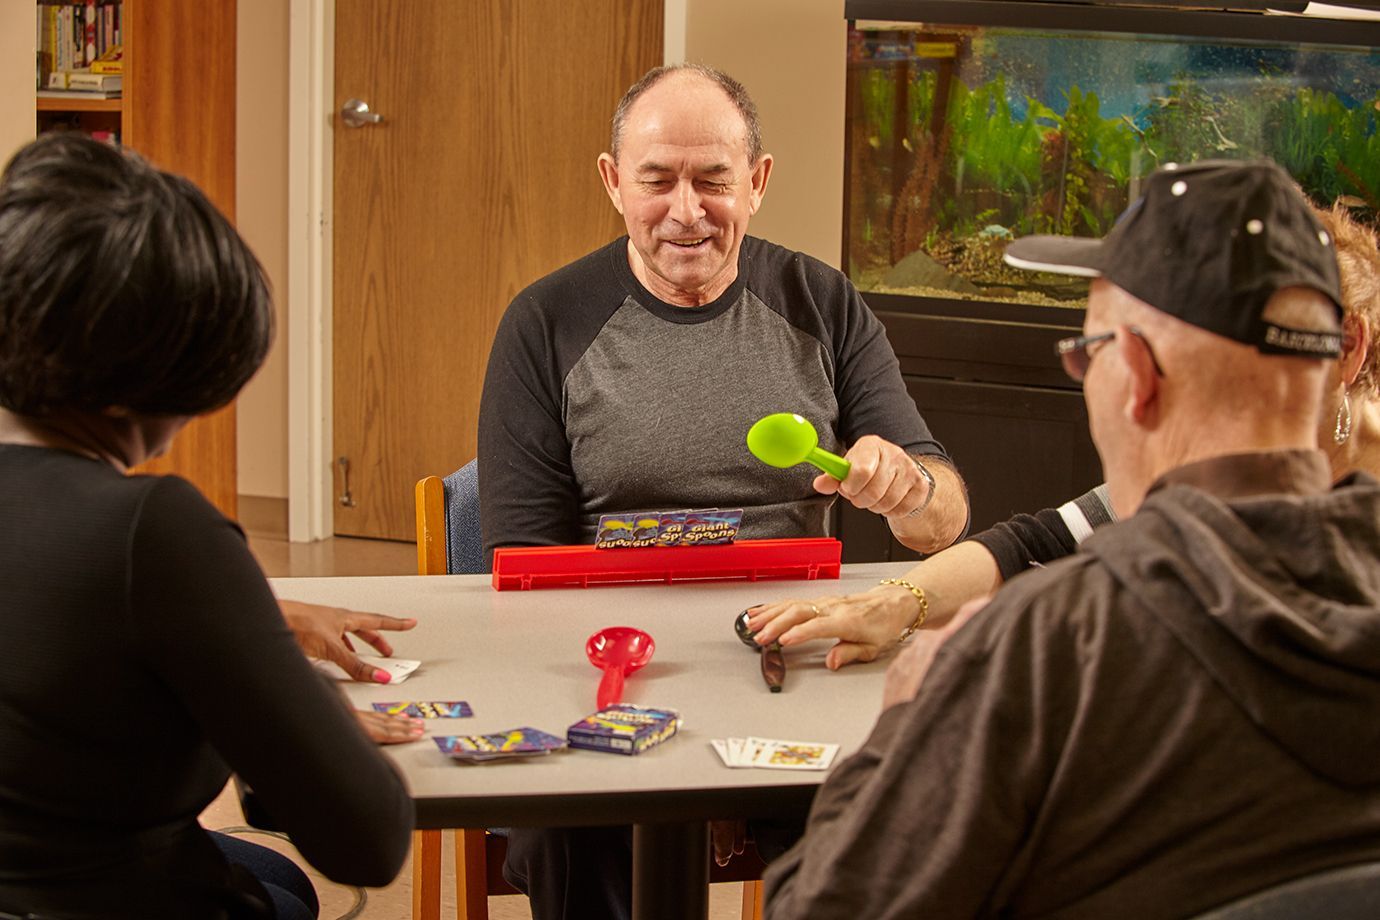 Group of adult day program participants engaged in activities around a table